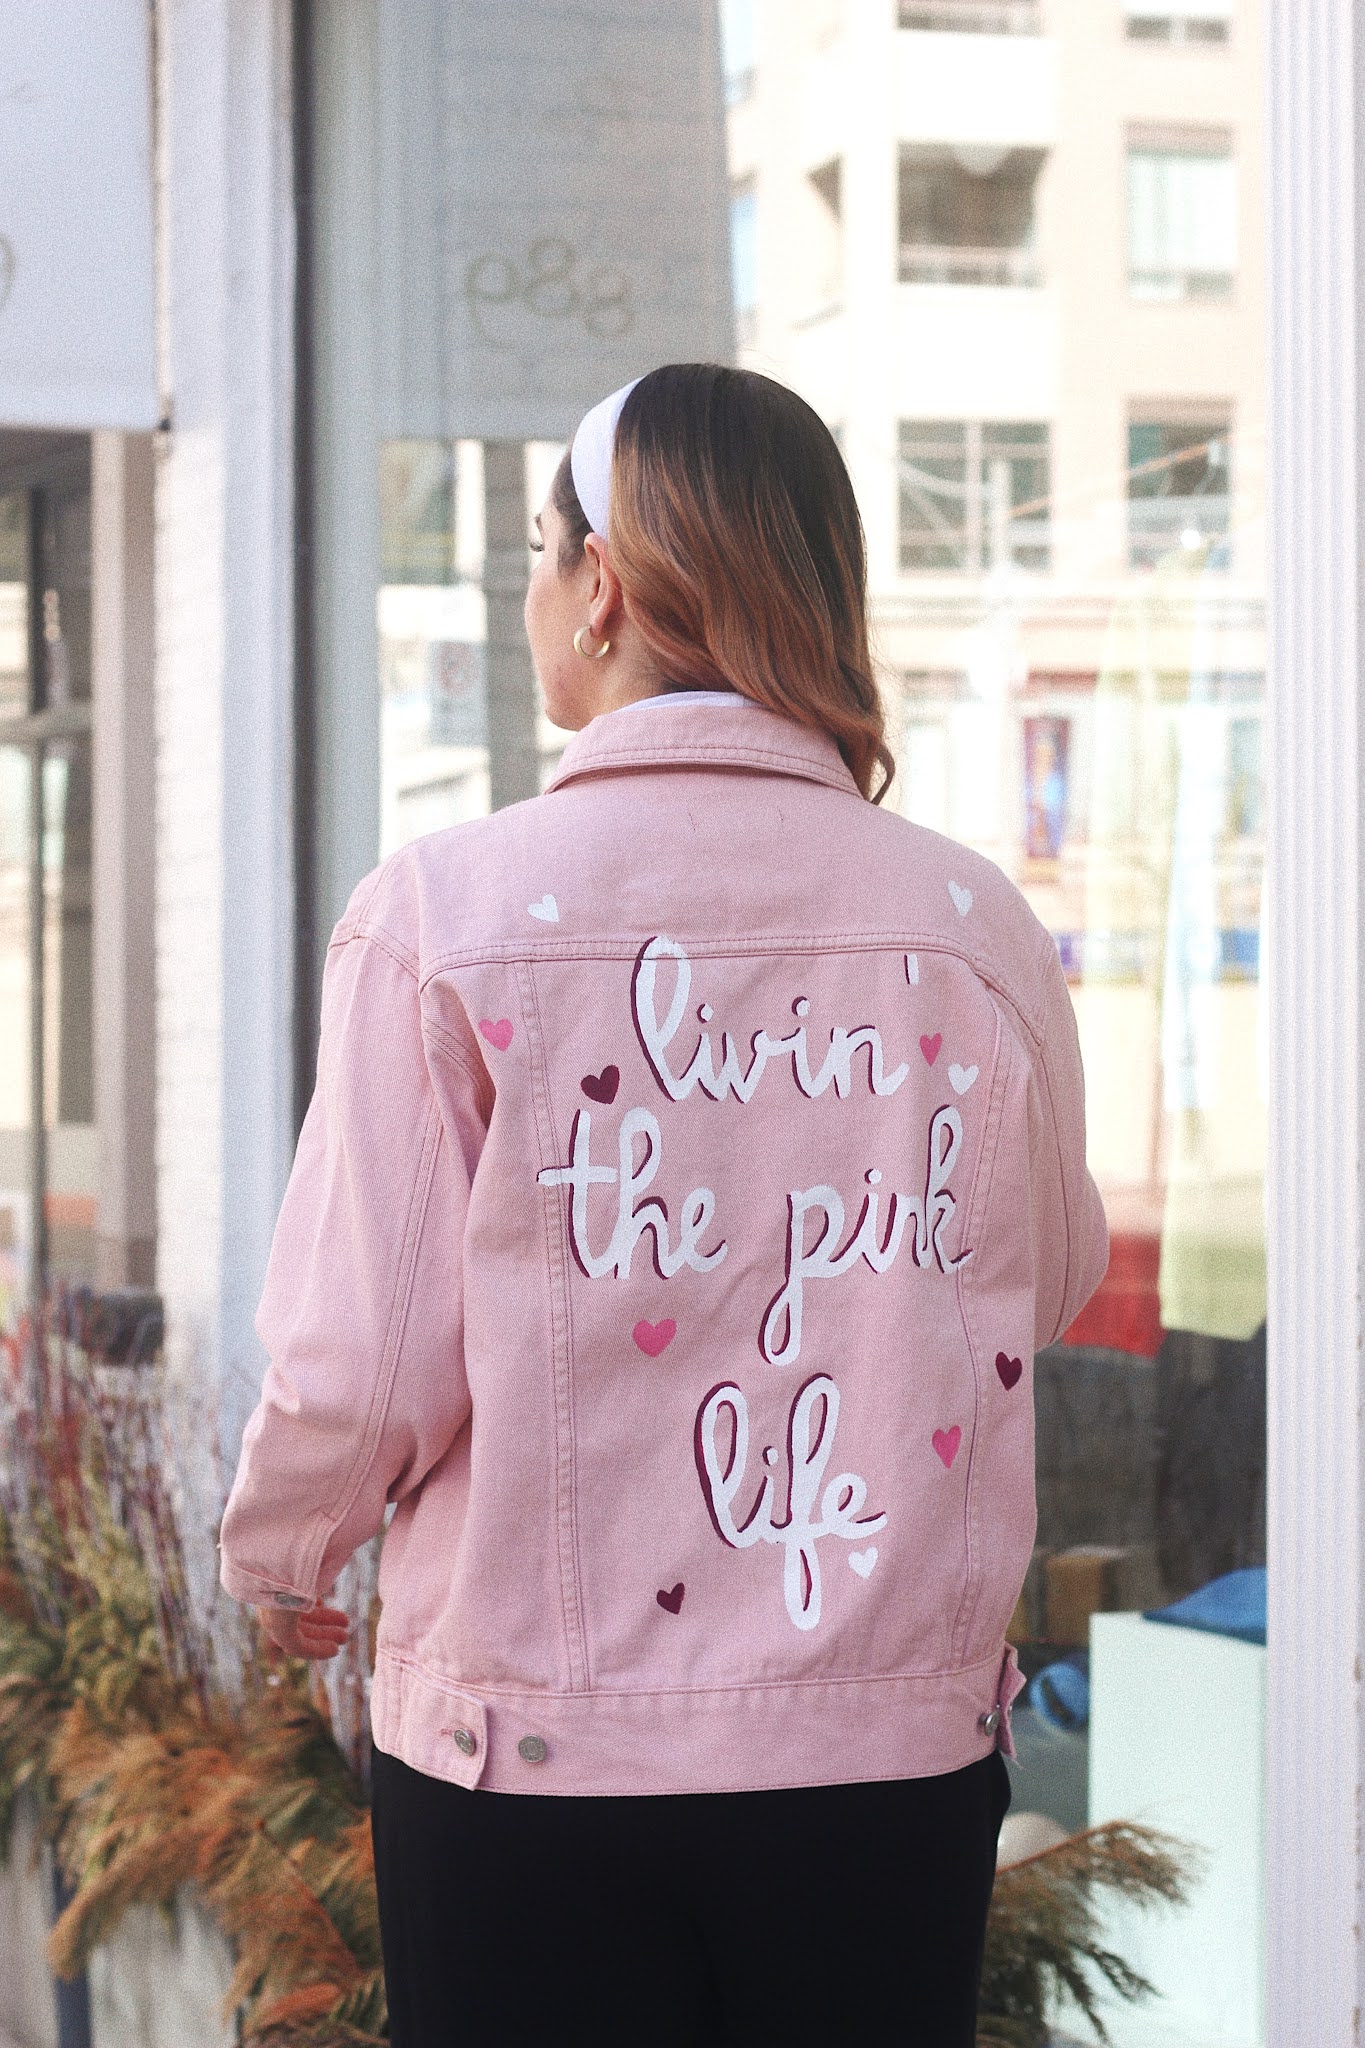 The Pink Life by Mikayla Ann: March 2021